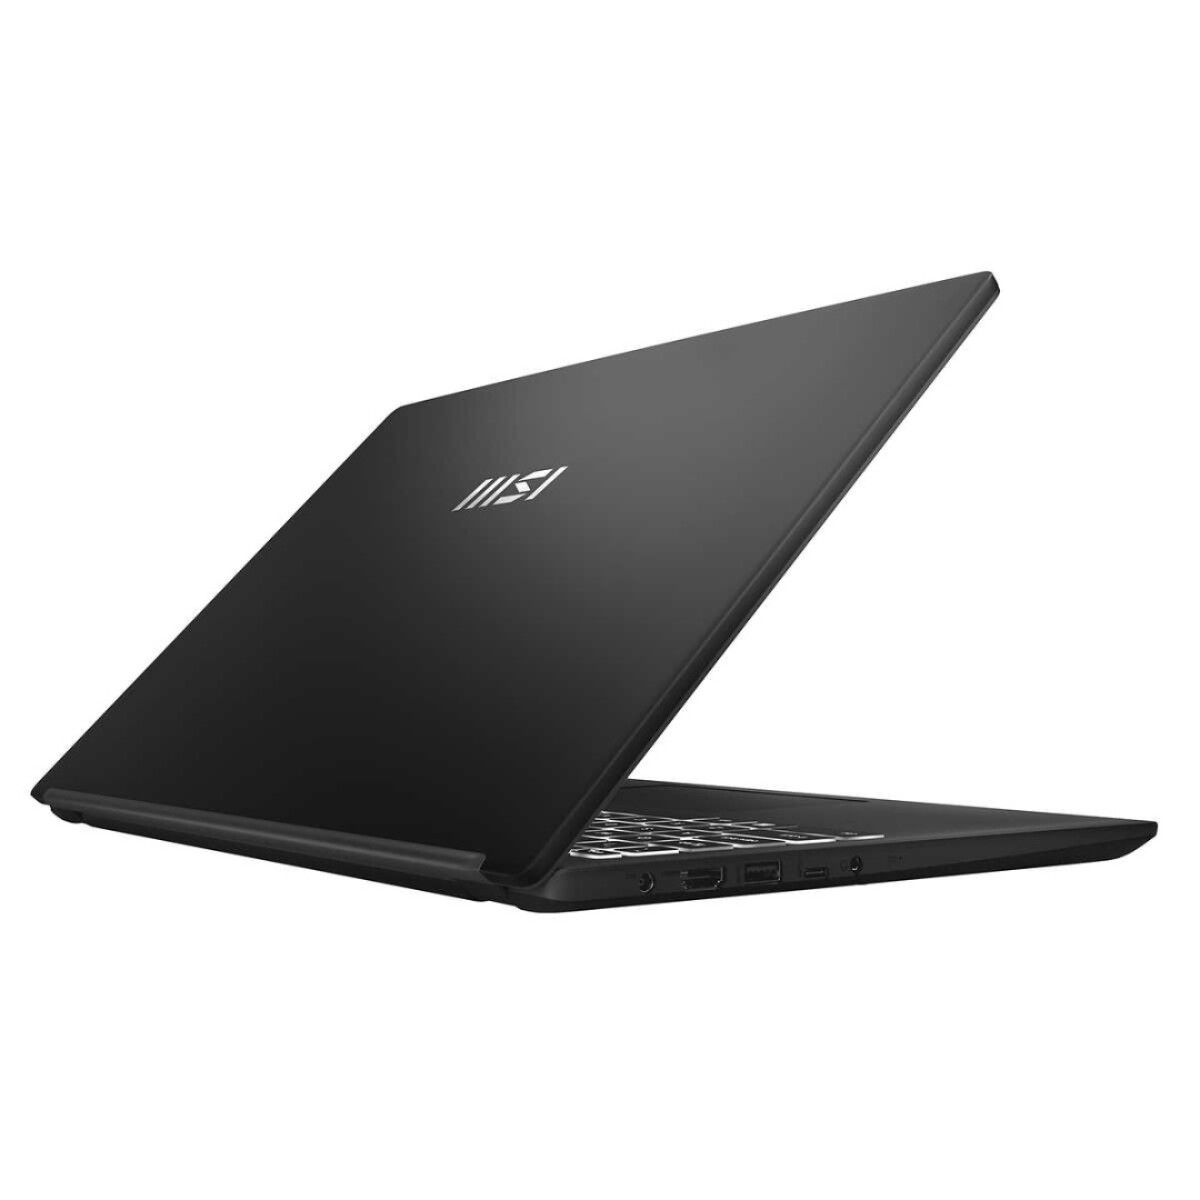 Notebook Msi Core I7 5.4GHZ, 16GB, 512GB Ssd, 15.6" Fhd 